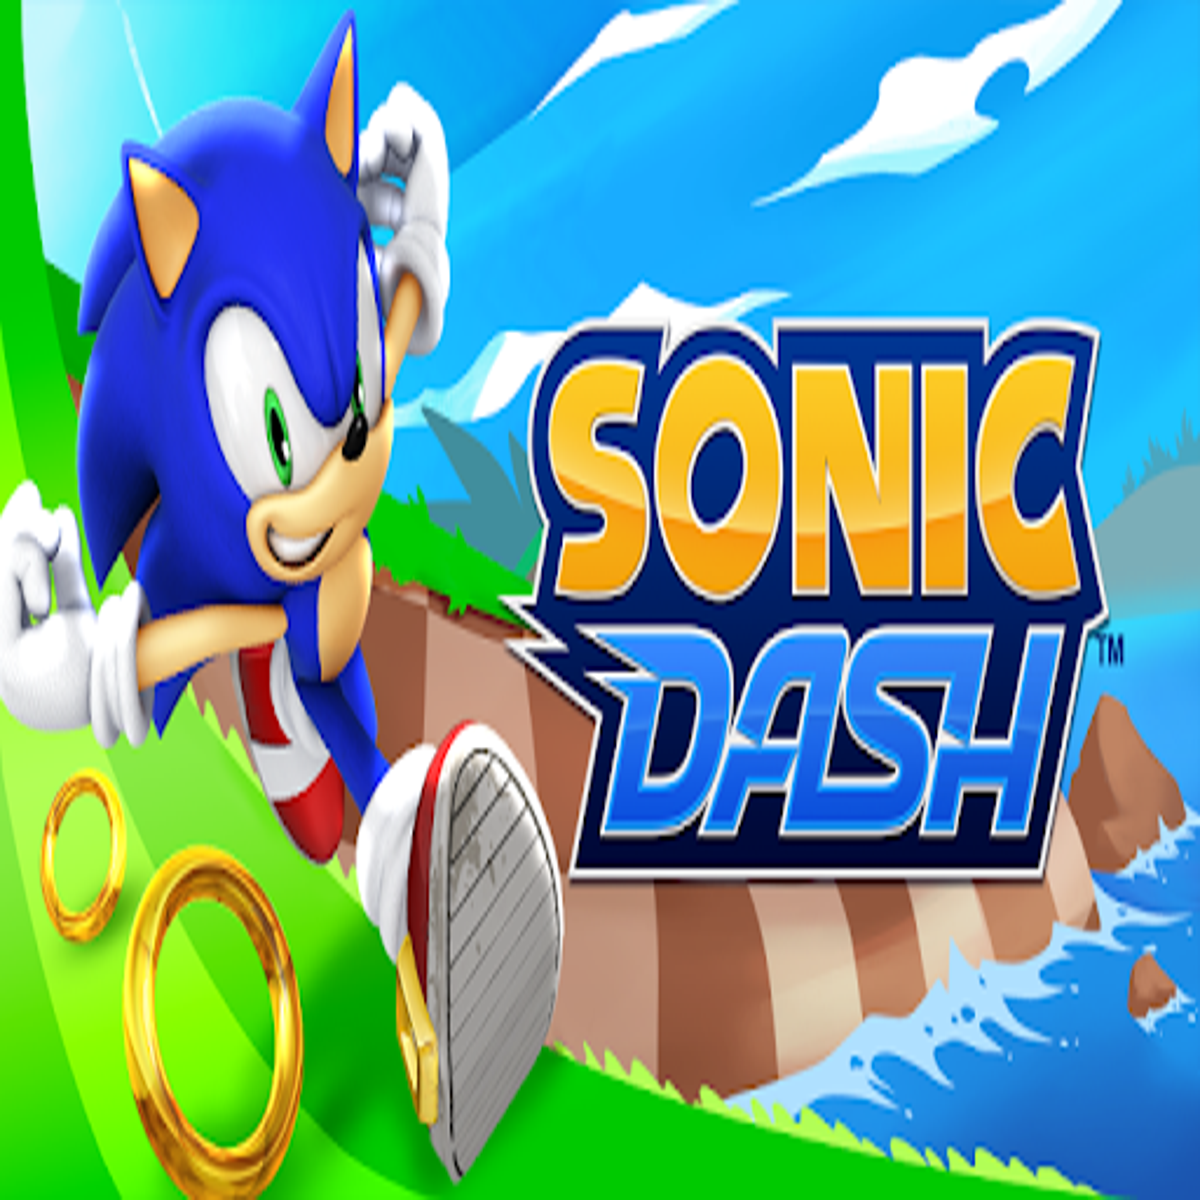 https://assetsio.gnwcdn.com/sonic_dash.png?width=1200&height=1200&fit=crop&quality=100&format=png&enable=upscale&auto=webp